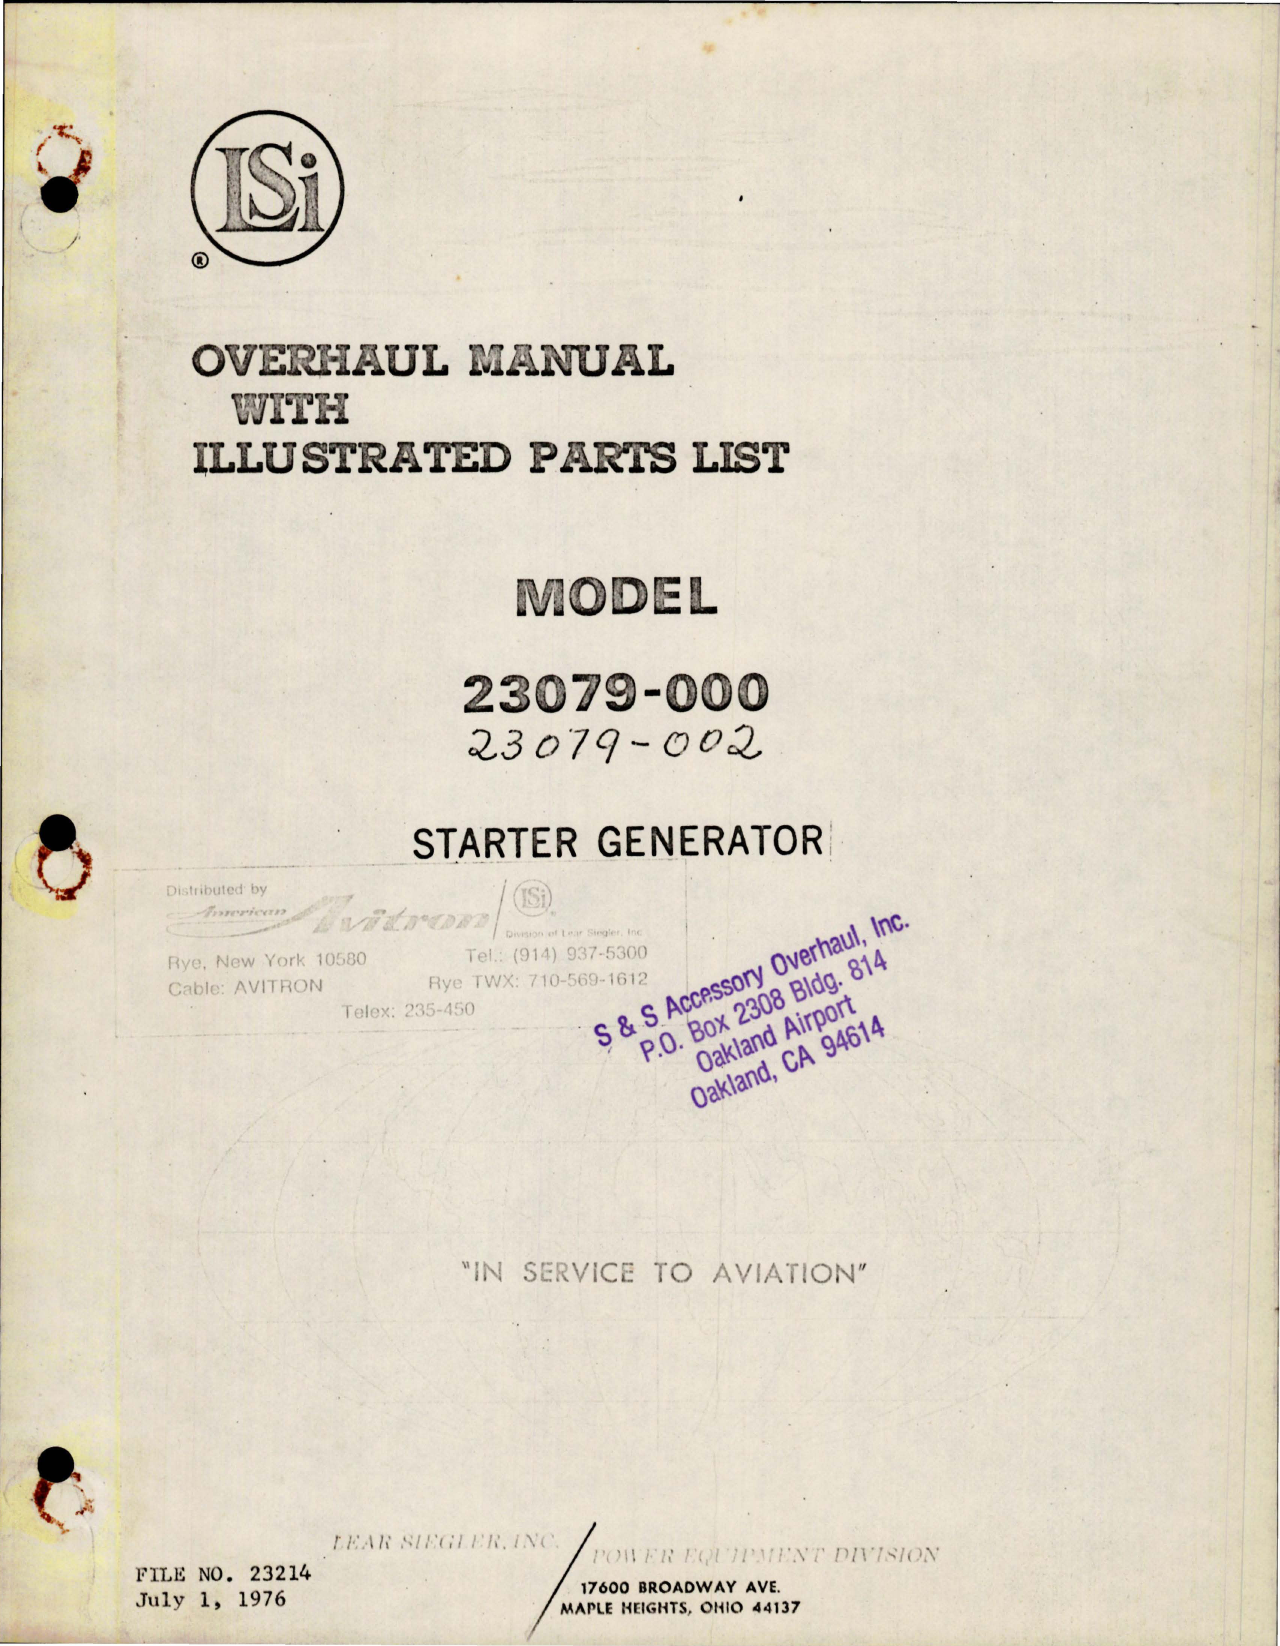 Sample page 1 from AirCorps Library document: Overhaul with Illustrated Parts List for Starter Generator - Model 23079-000 